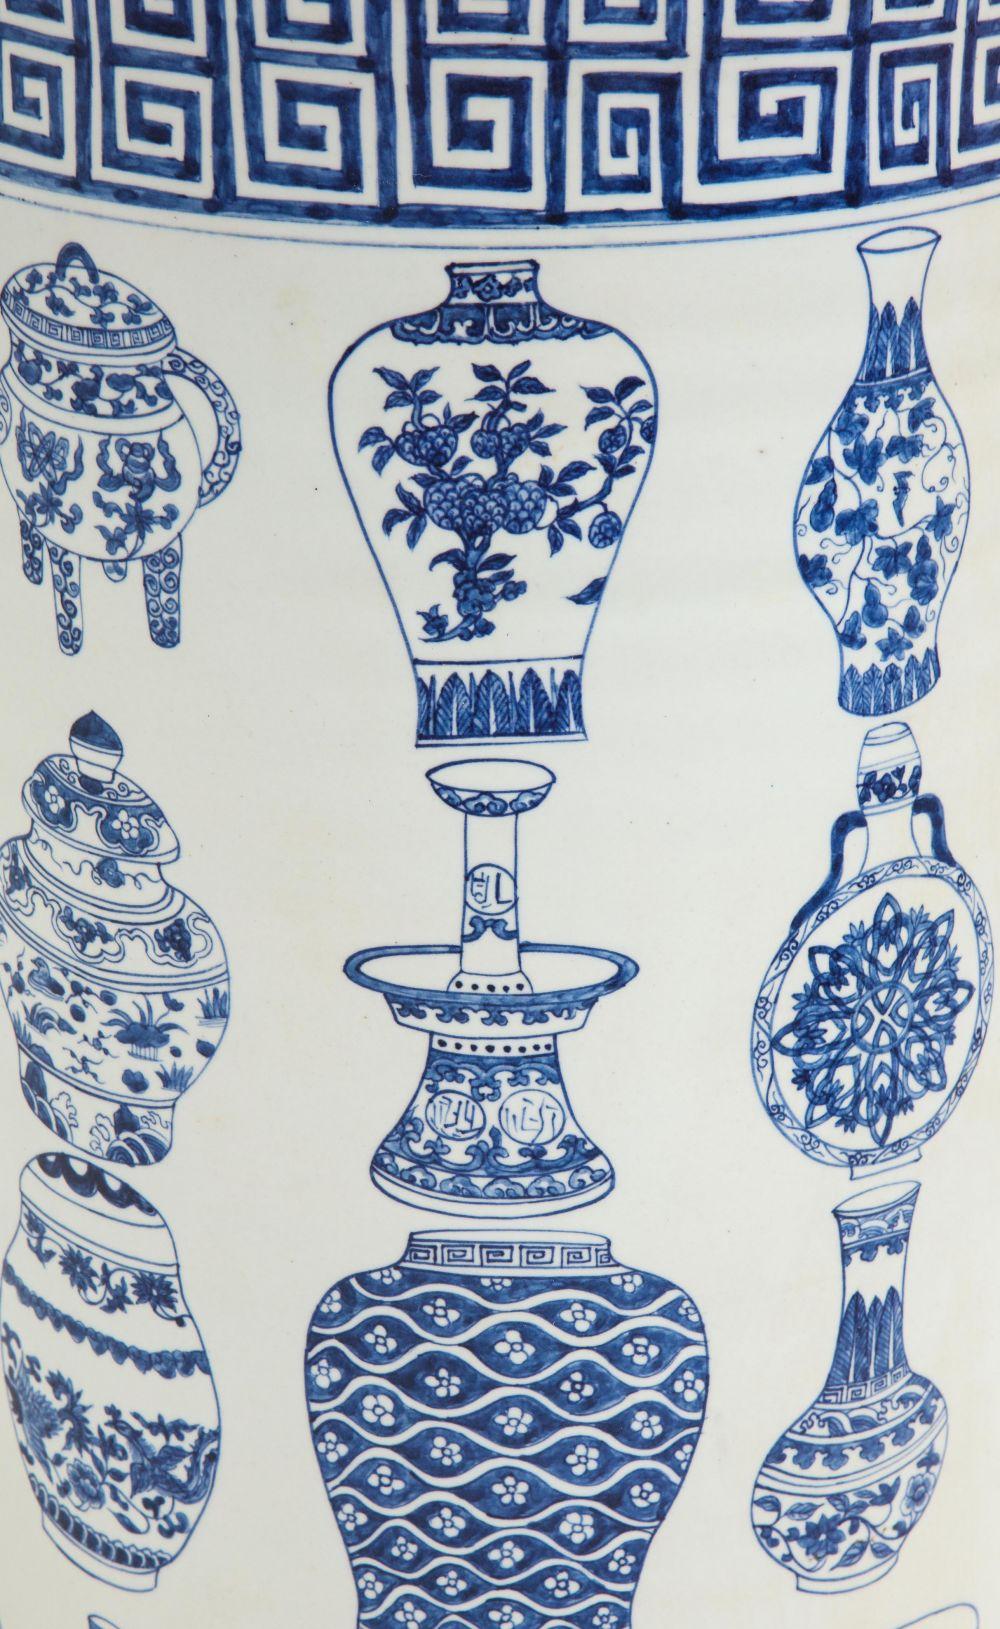 Of cylindrical form; with meander borders; decorated with an assortment of different blue and white Chinese vases.